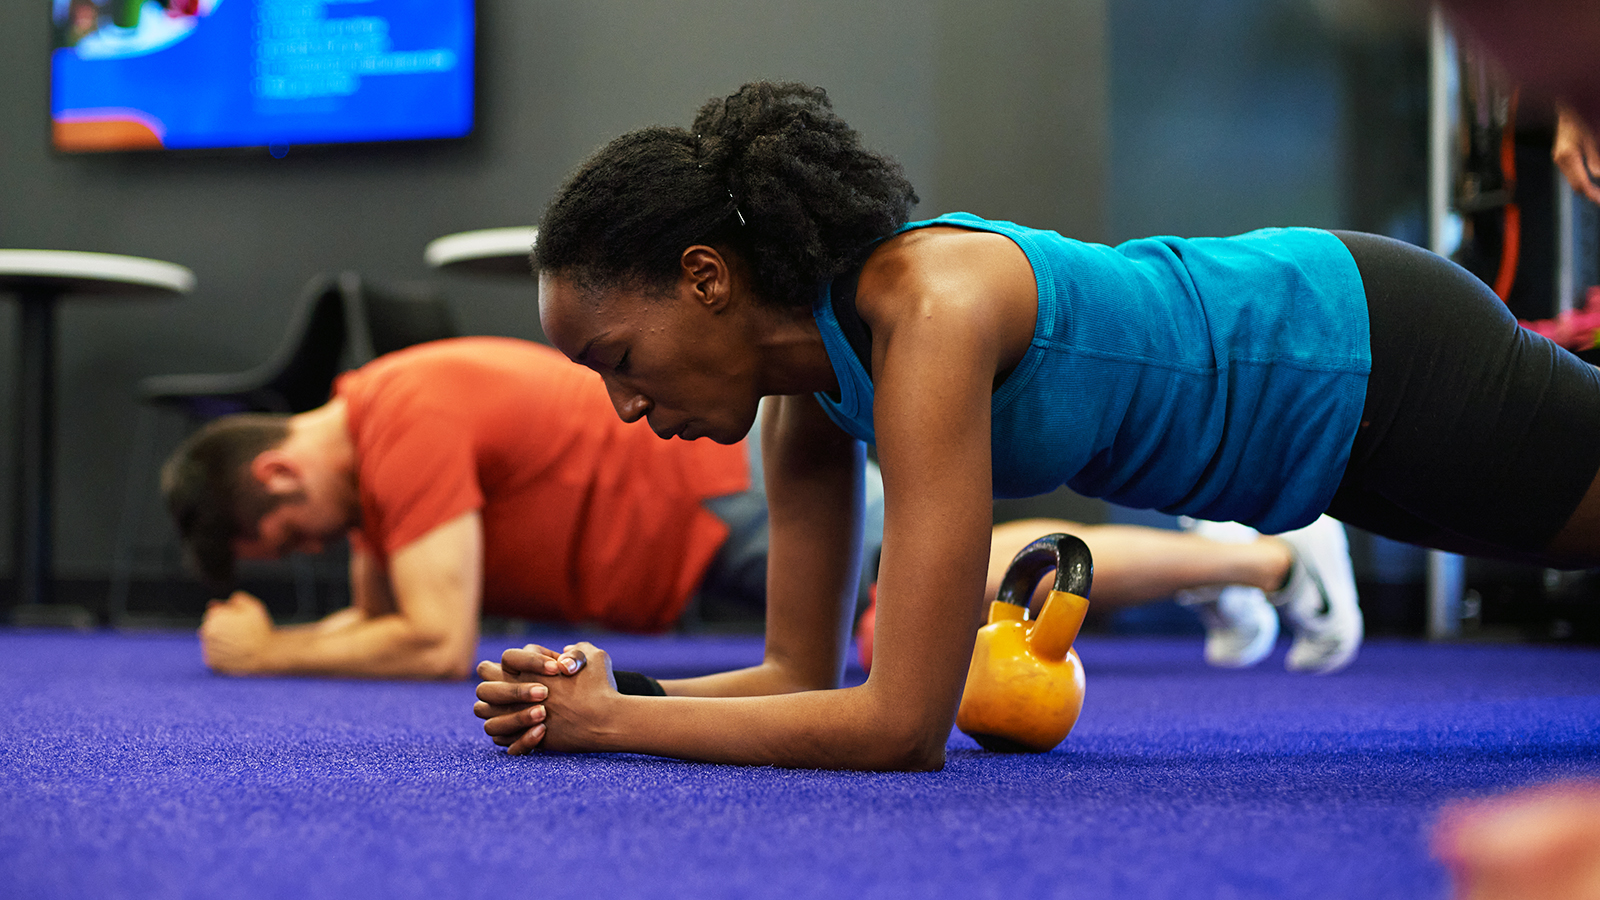 Circuit Training Exercises and Why You'll Love Them